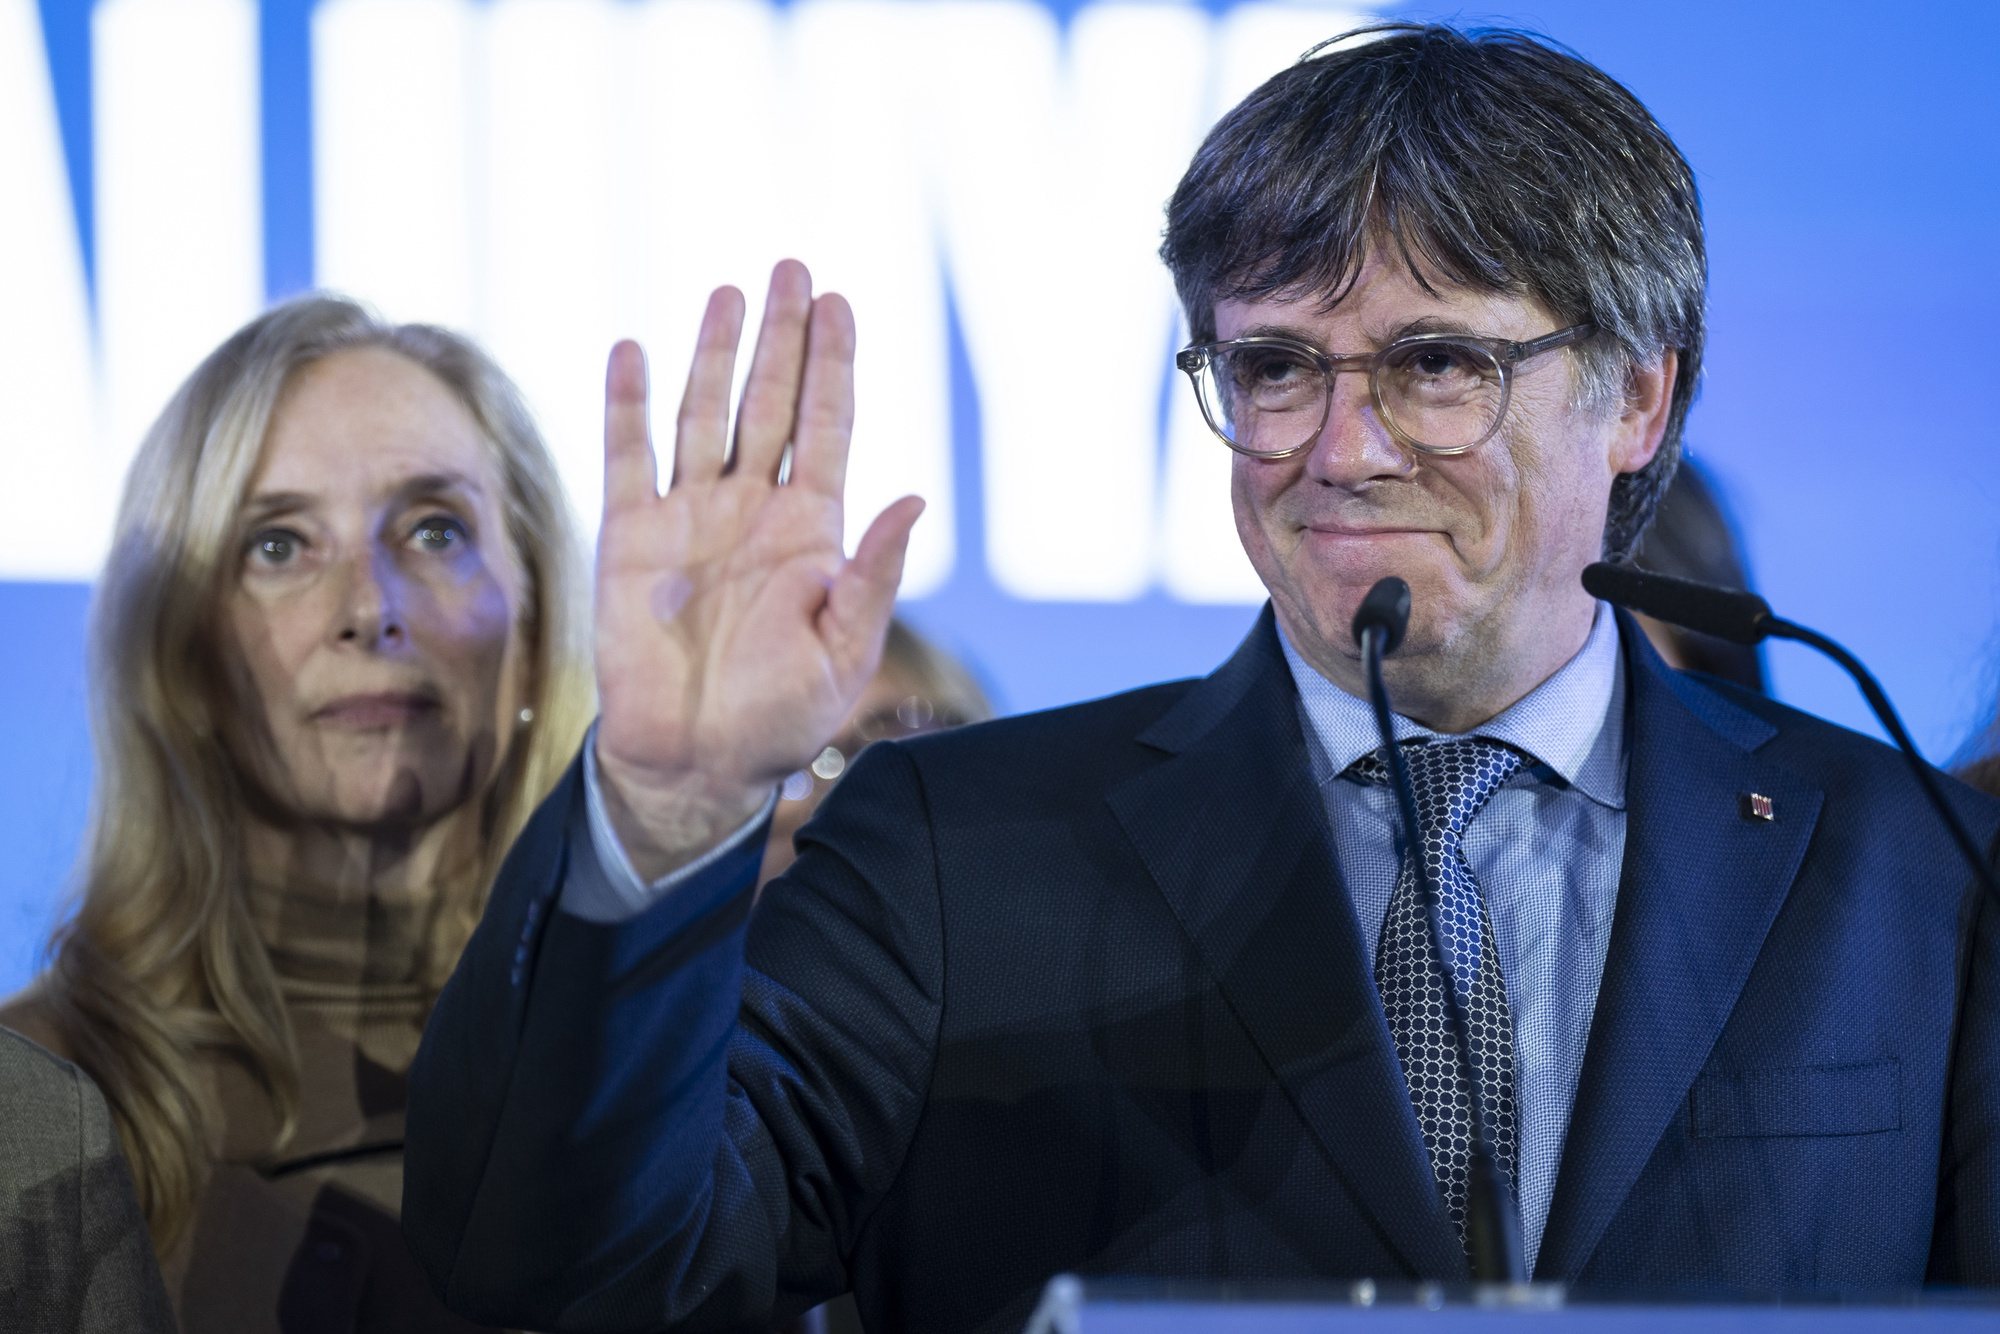 epa11336196 Catalonian JxCat party candidate Carles Puigdemont delivers a press conference during the Catalonia regional election, in Argeles-sur-Mer, France, 12 May 2024. Catalonia holds regional elections on 12 May in which Catalans are called to elect the 15th Parliament of the autonomous community of Catalonia.  EPA/David Borrat